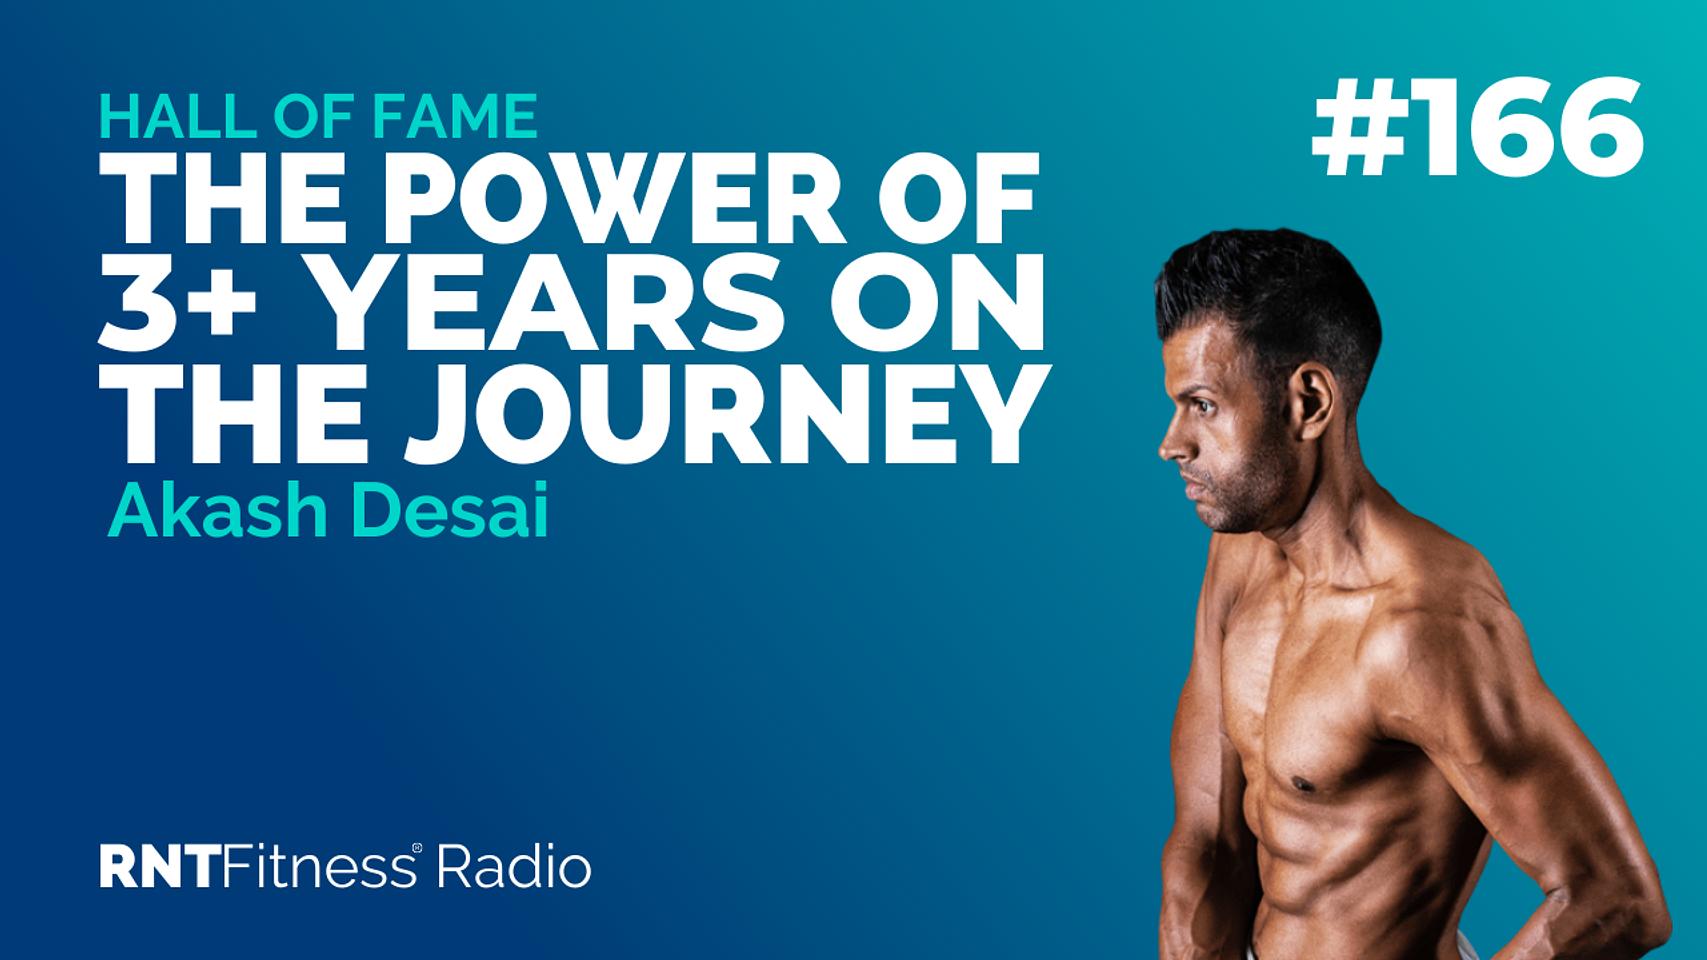 Ep. 166 - Hall of Fame | Akash Desai: The Power Of 3+ Years On The Journey